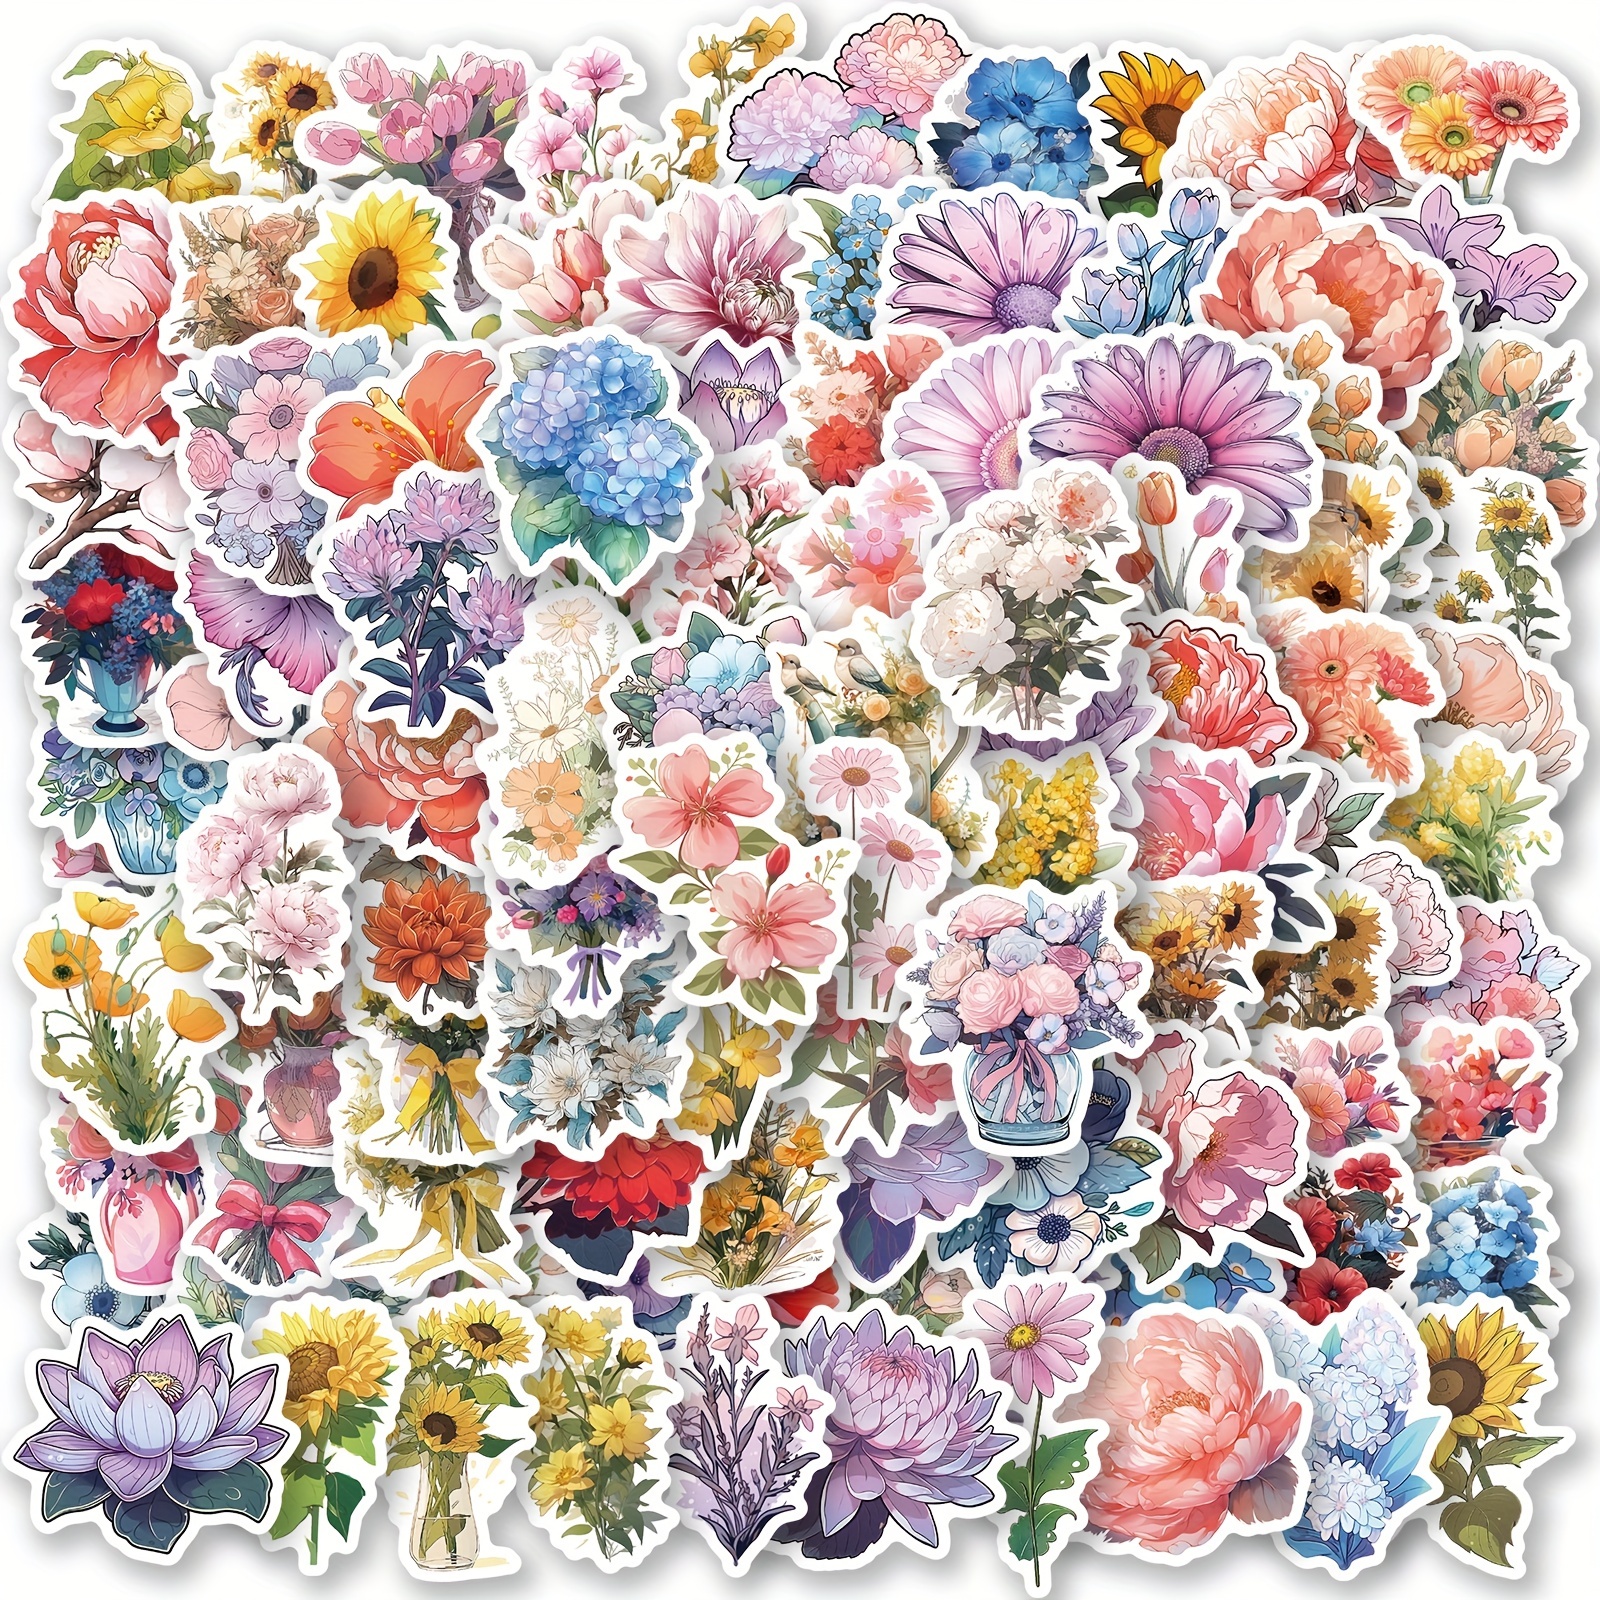 Mini Flowers Sticker Book - Aesthetic Stickers for Scrapbooking